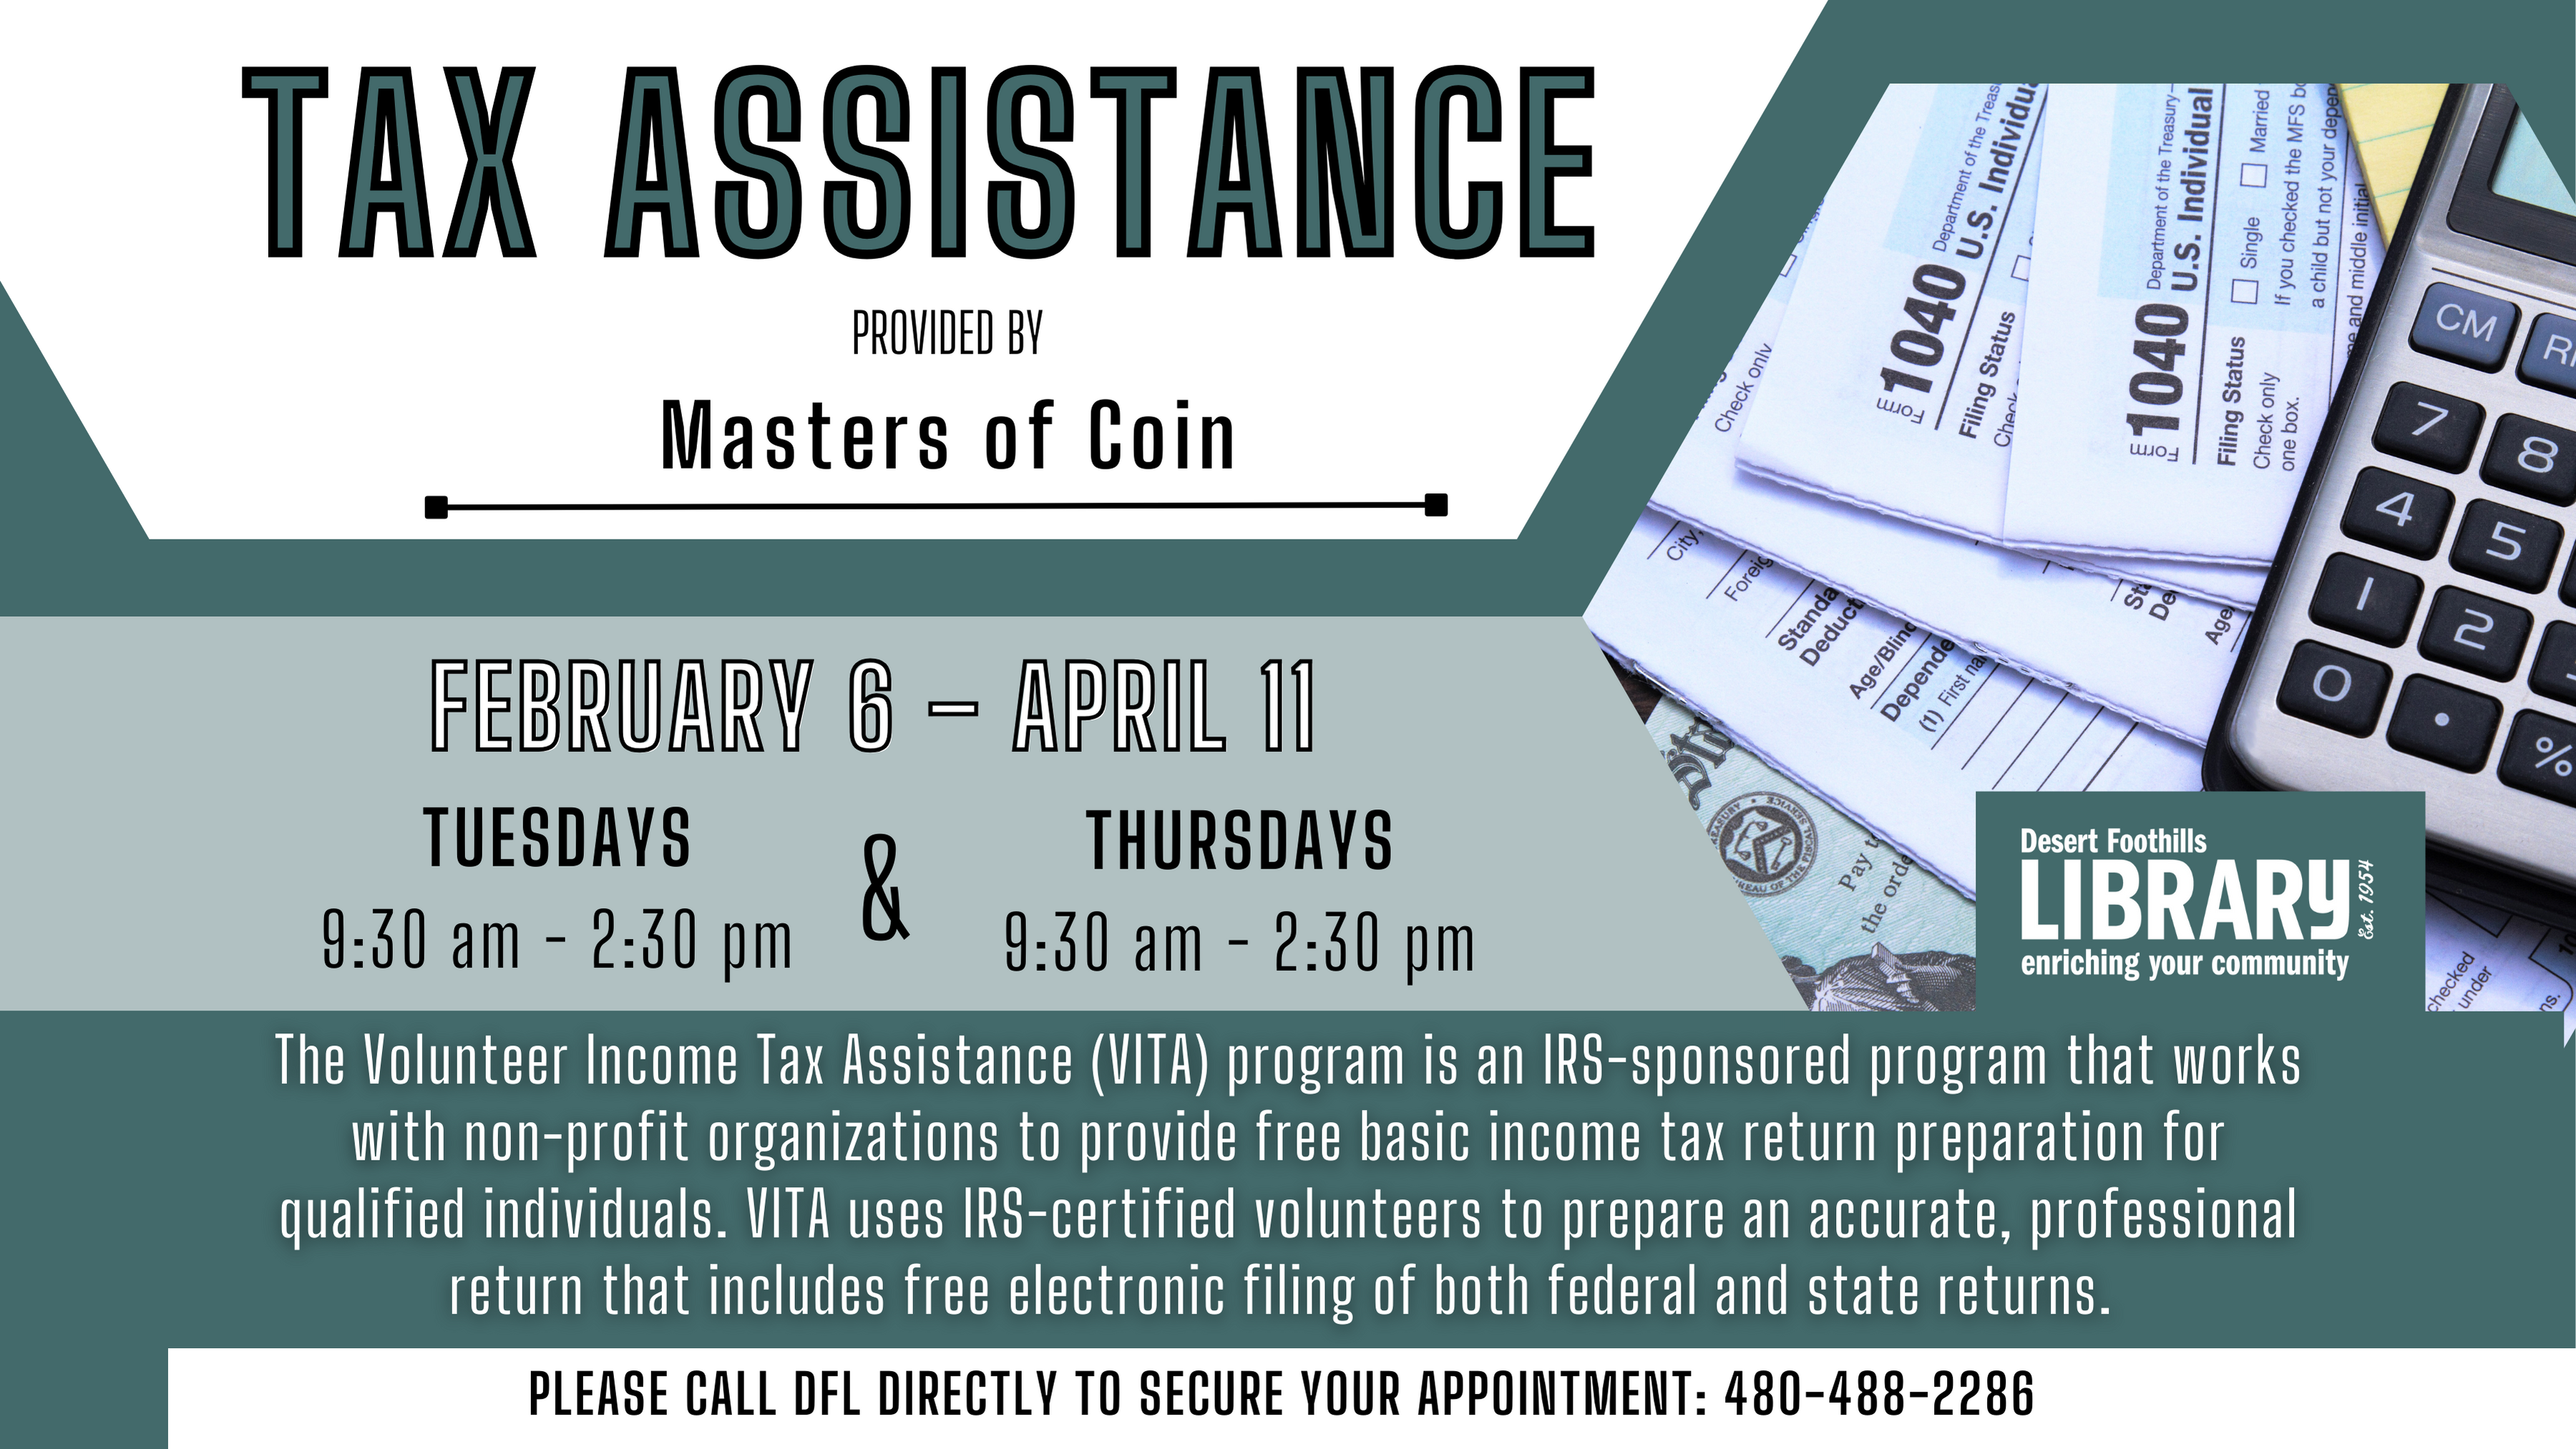 Tax assistance at the desert foothills library